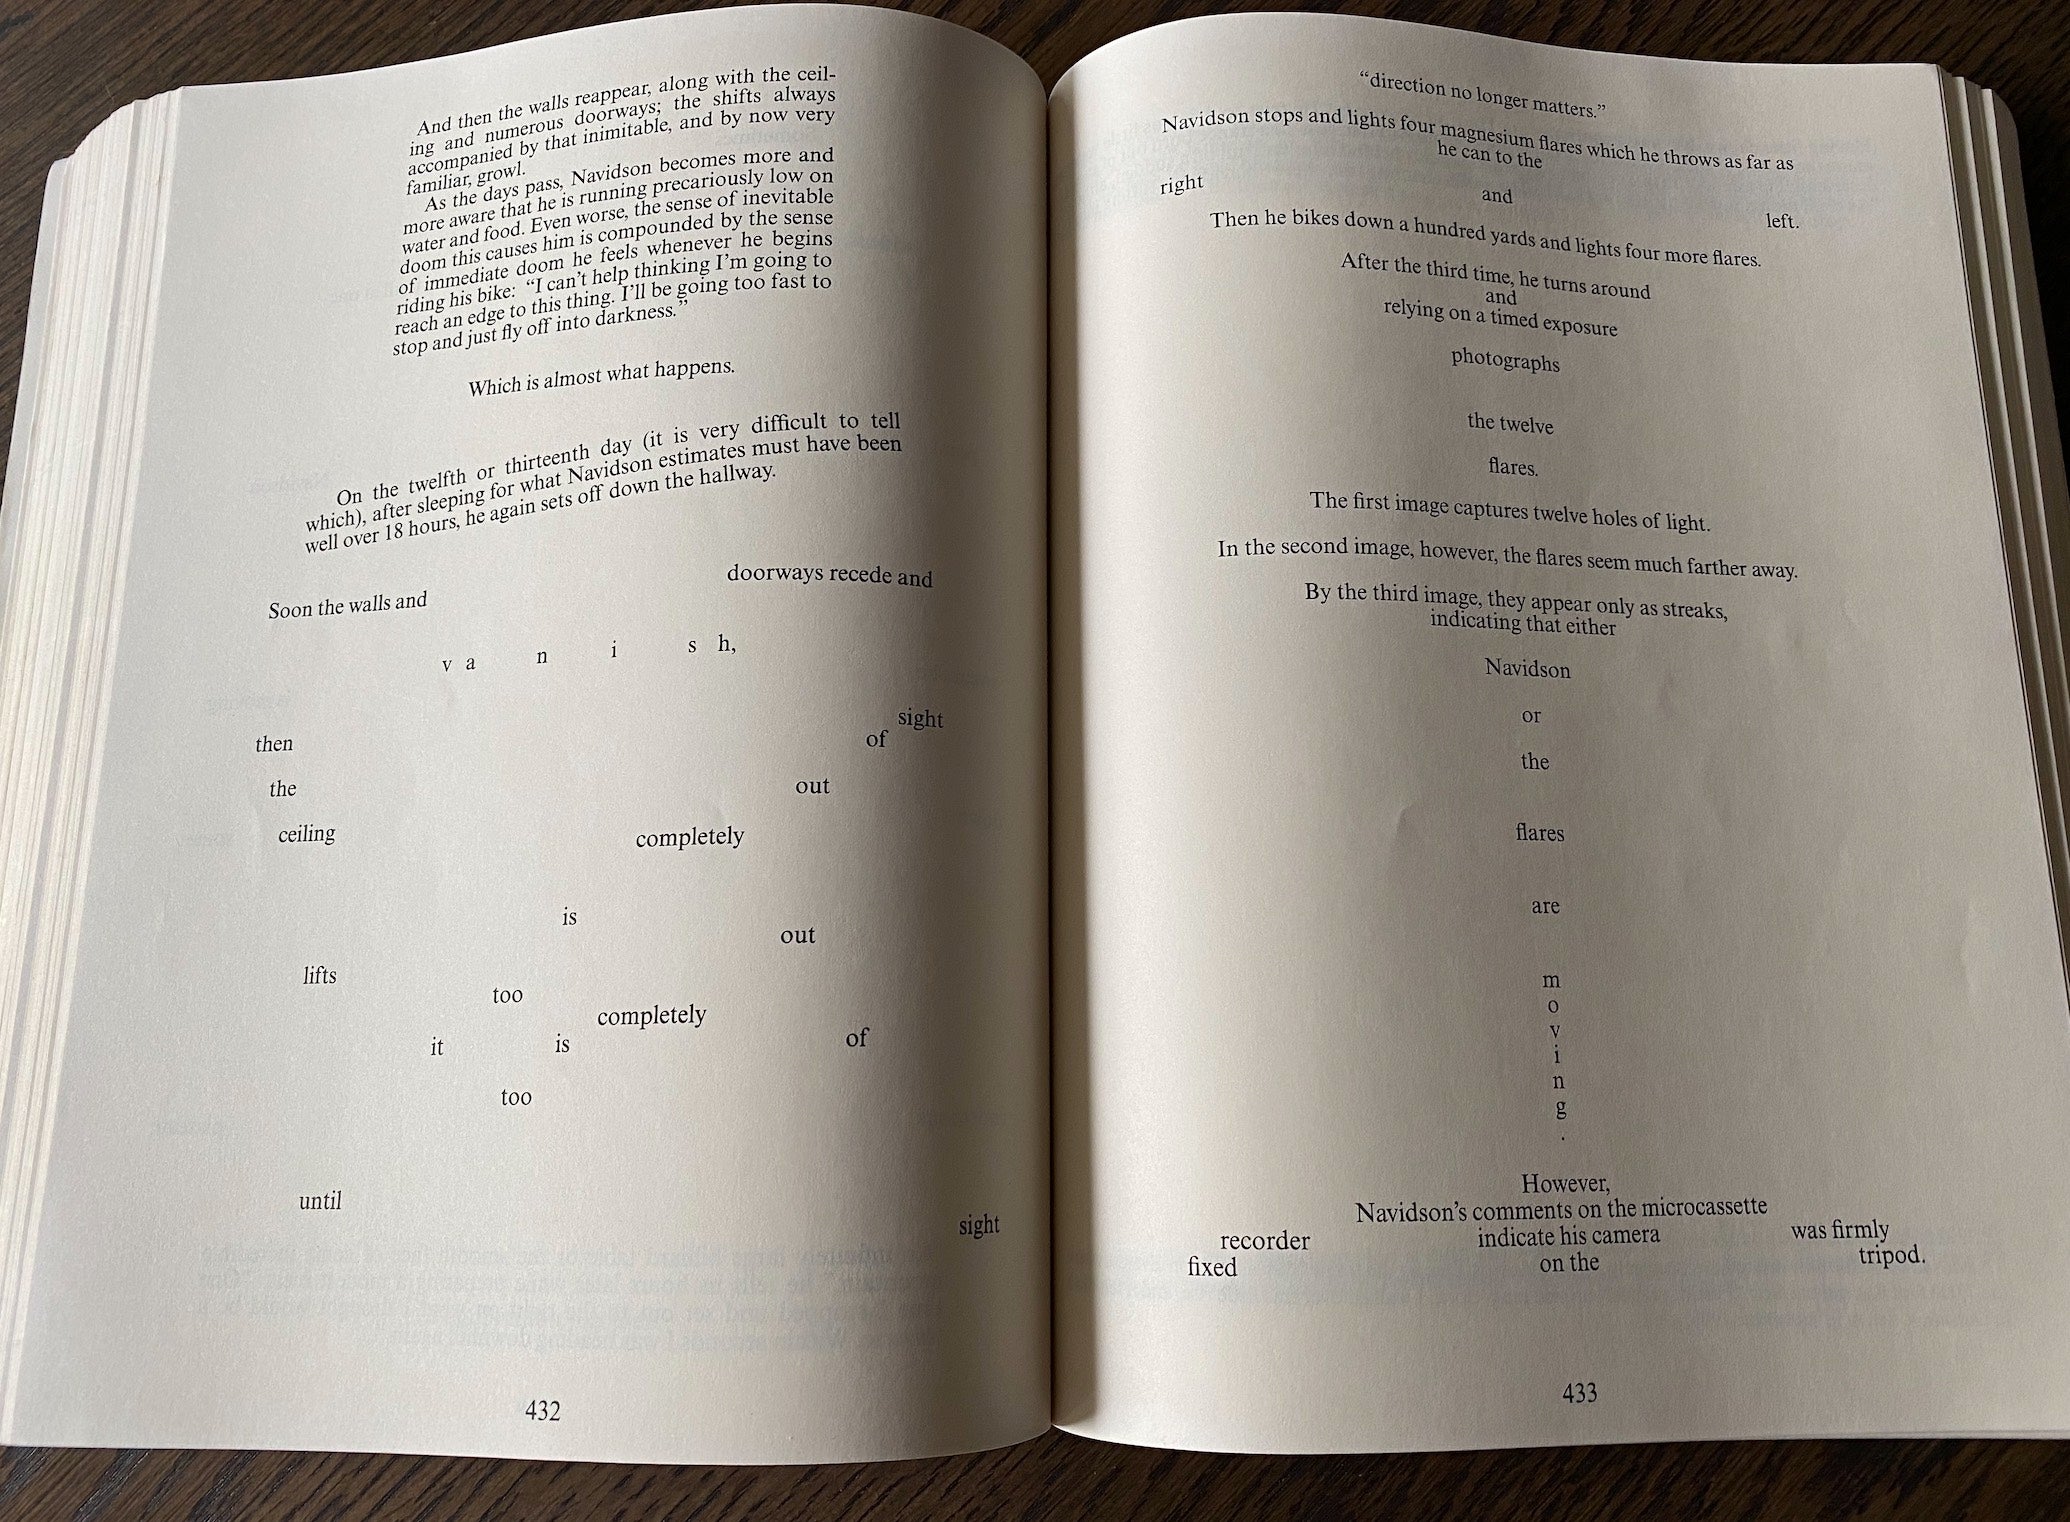 Two pages from House of Leaves showing examples of print style. (Photo: iPhone/Random House)